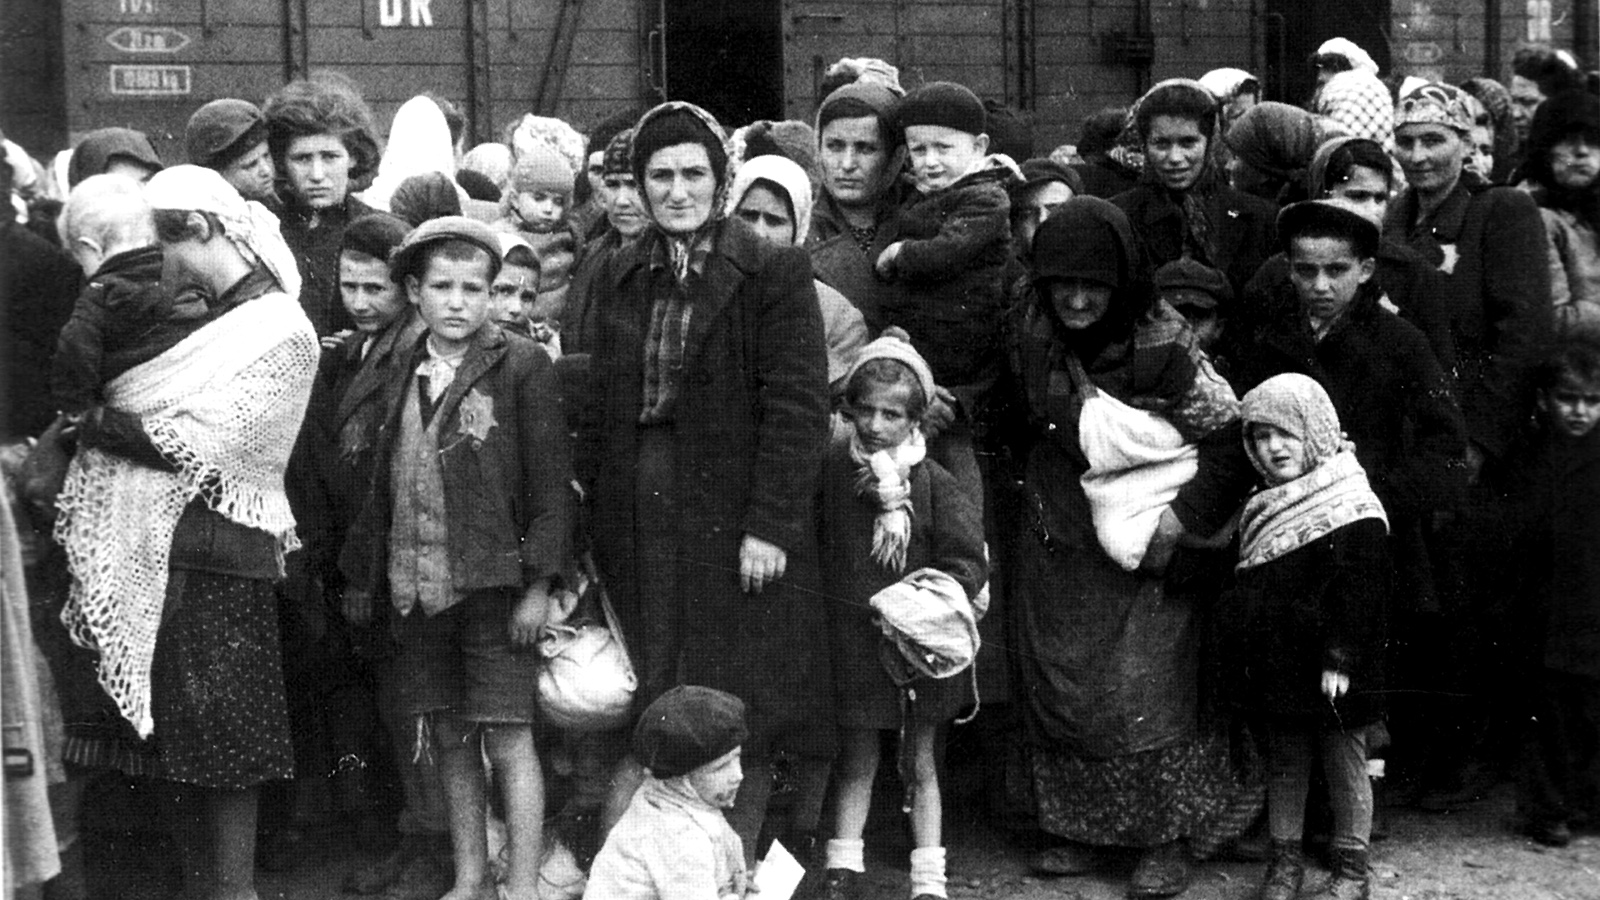 The majority of Hungary's Jewish population was murdered in Auschwitz between May and July 1944